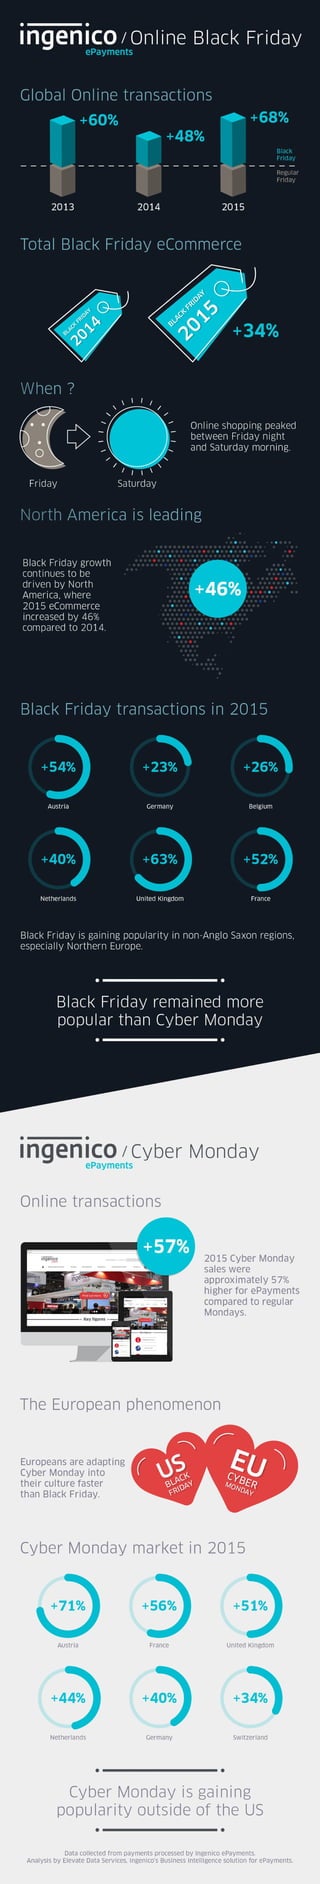 Black Friday and Cyber Monday Infographic 